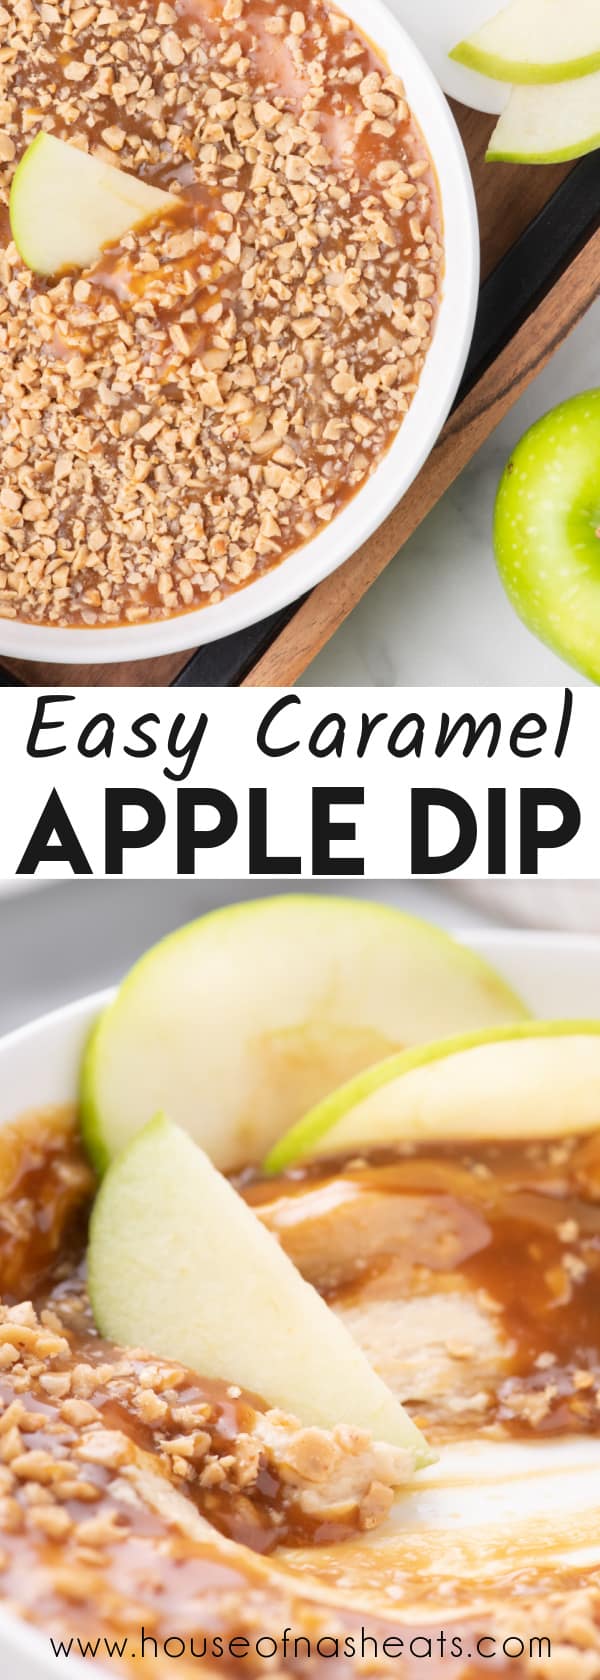 A collage of images of caramel apple dip with text overlay.